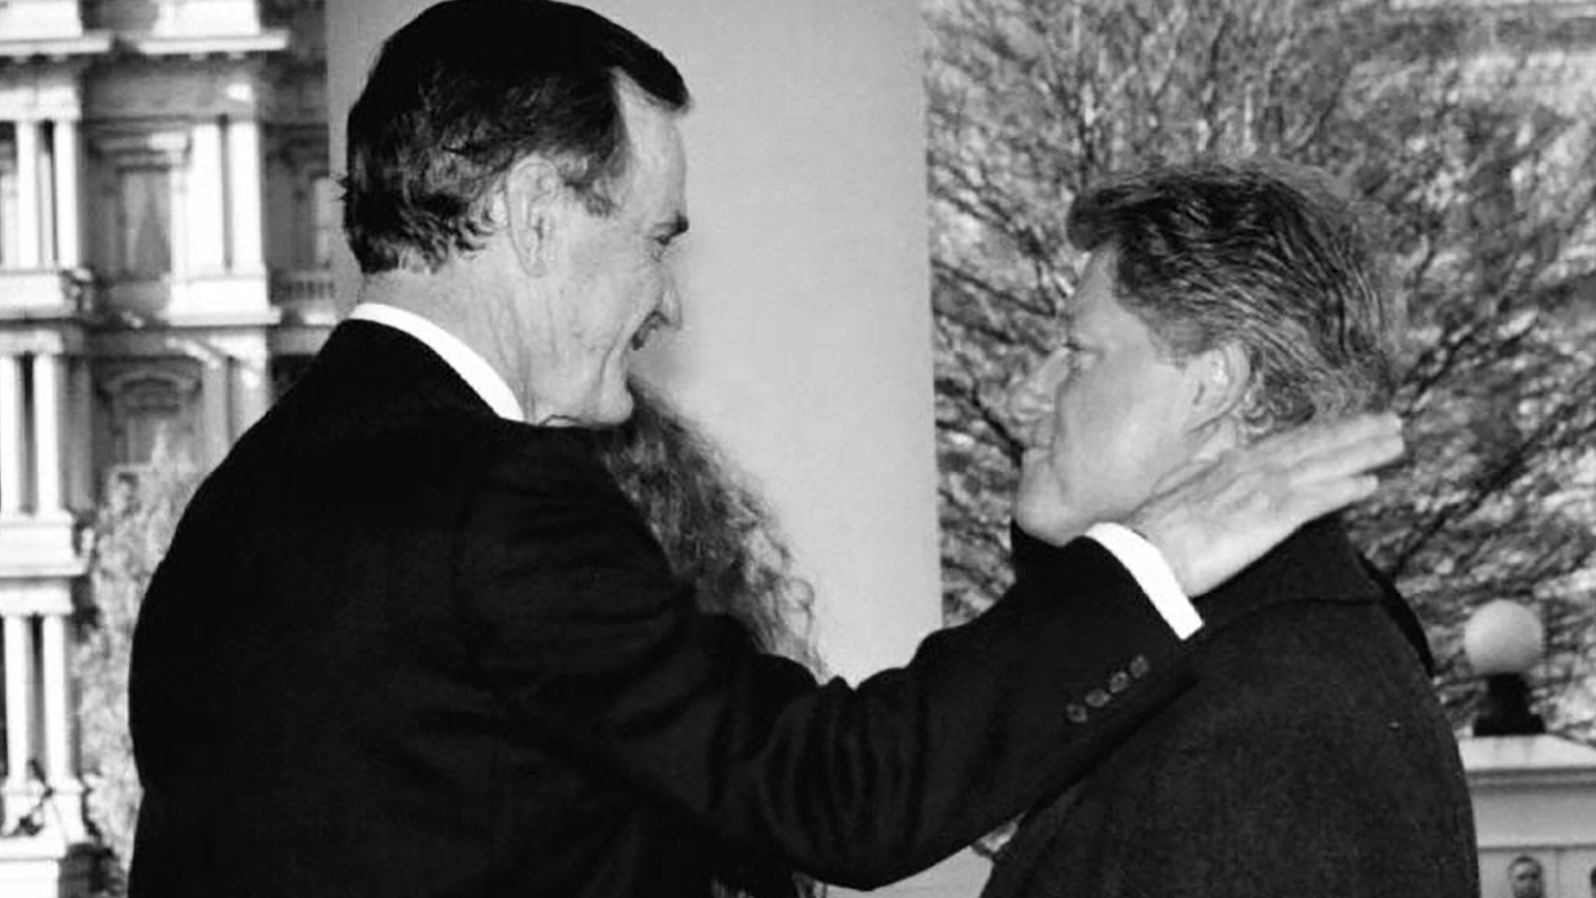 President George H.W. Bush greets President-elect Bill Clinton upon his arrival to the White House on Inauguration Day in 1993.